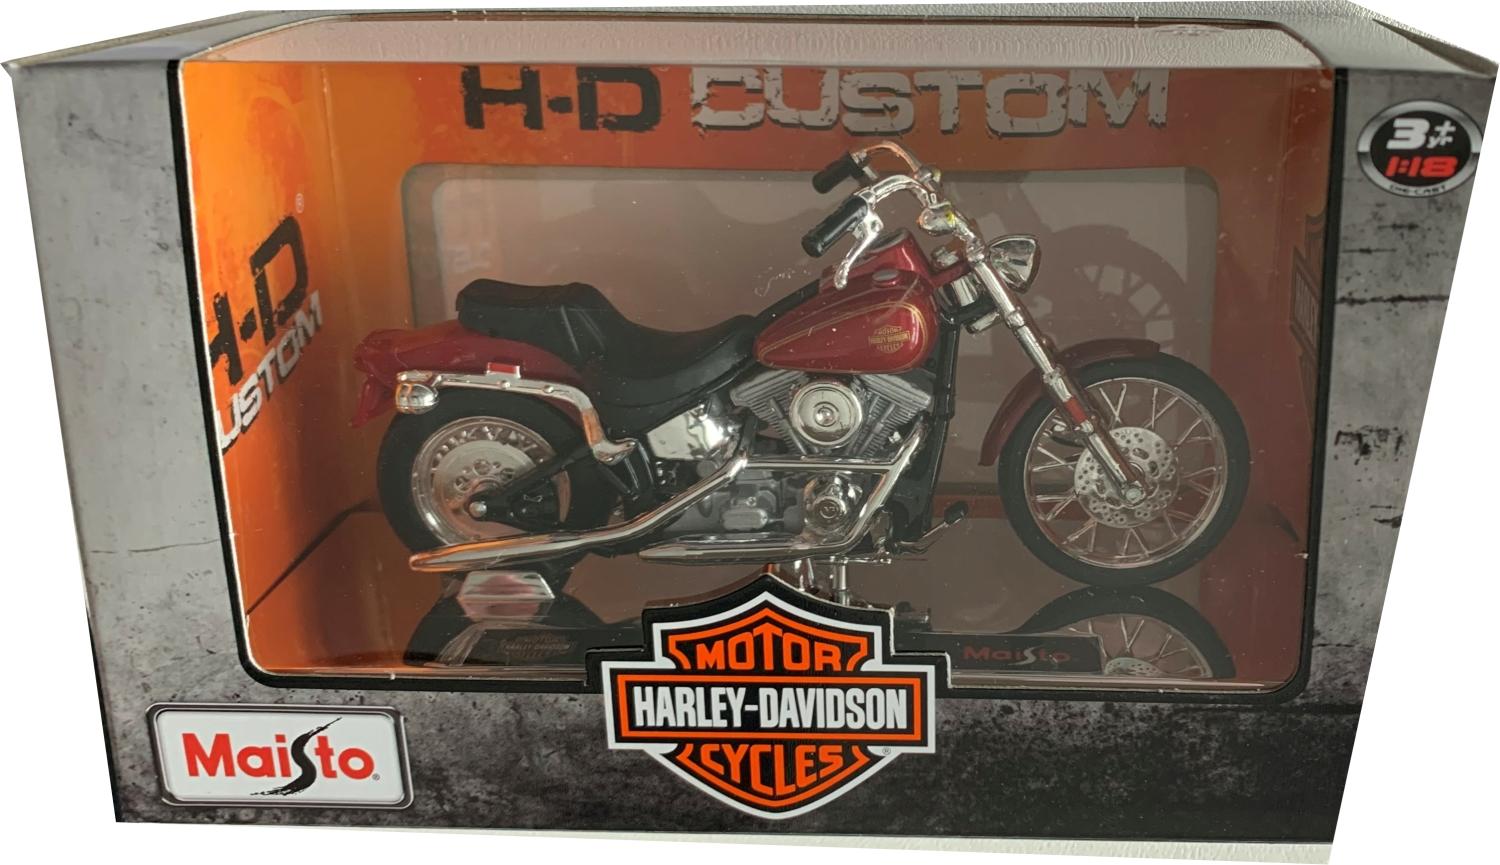 Harley Davidson 1984 FXST Softail in red 1:18 scale model from Maisto